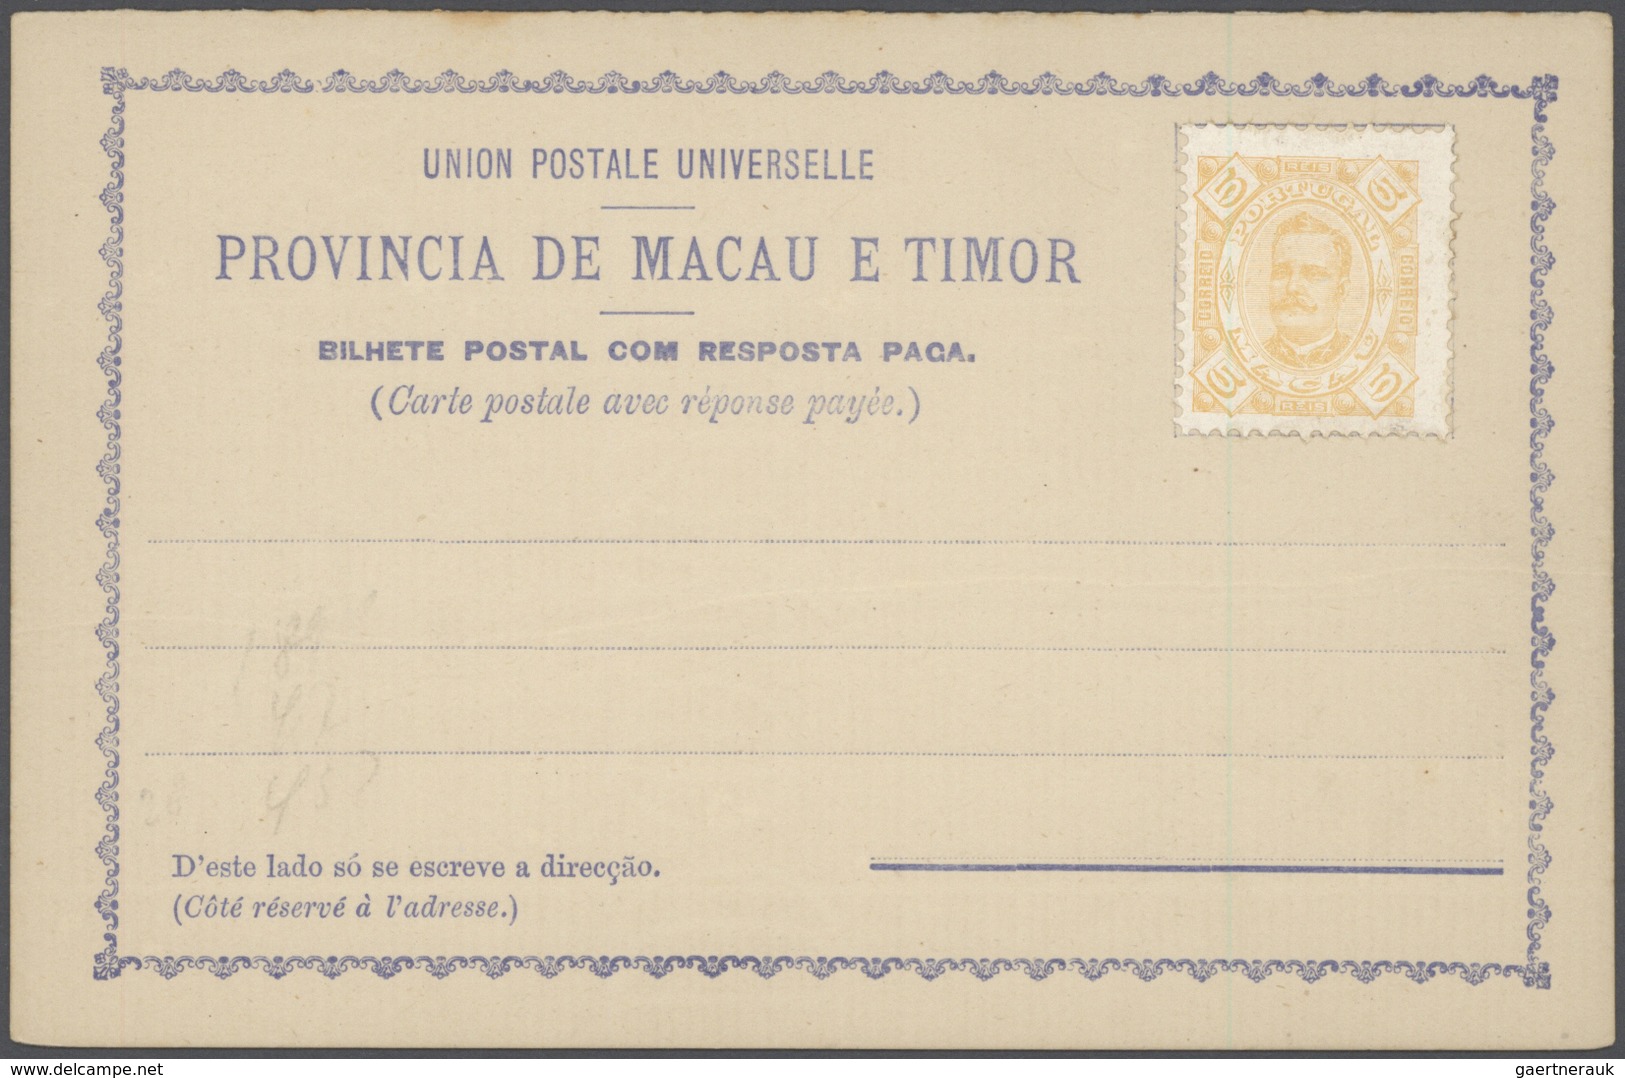 23510 Macau - Ganzsachen: 1892/1900 (ca.), stationery mint (25, also cto x2), only provisional forms with